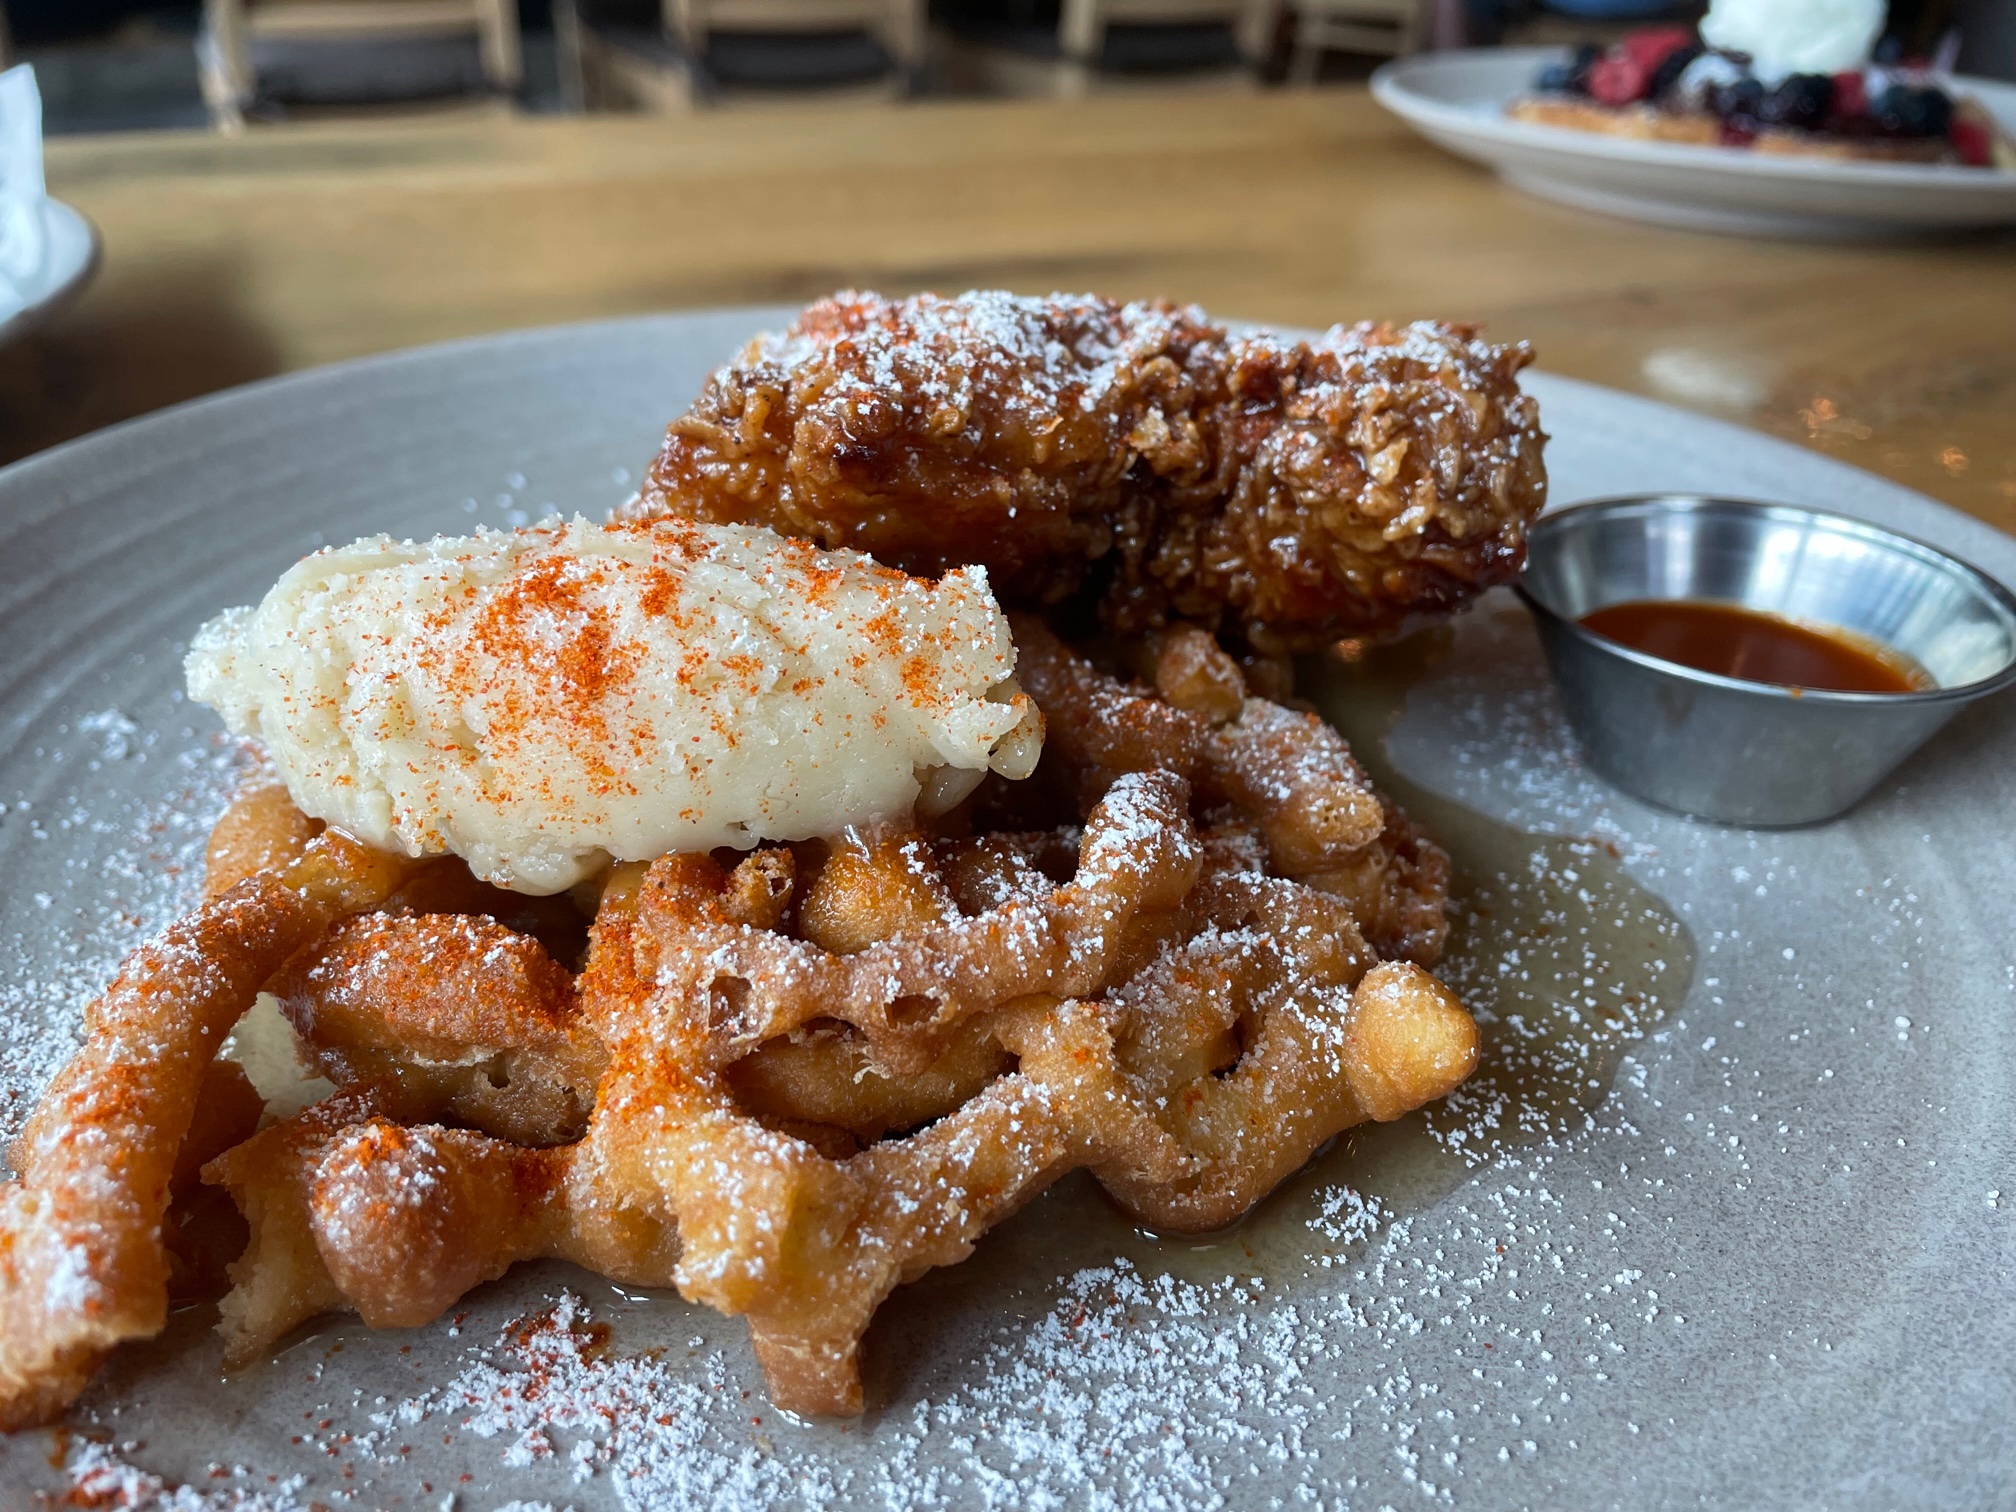 On a gray plate, there is a funnel cake with a large dollop of butter dusted with cayenne pepper beside Korean fried chicken dusted with powdered sugar. Photo by Alyssa Buckley.